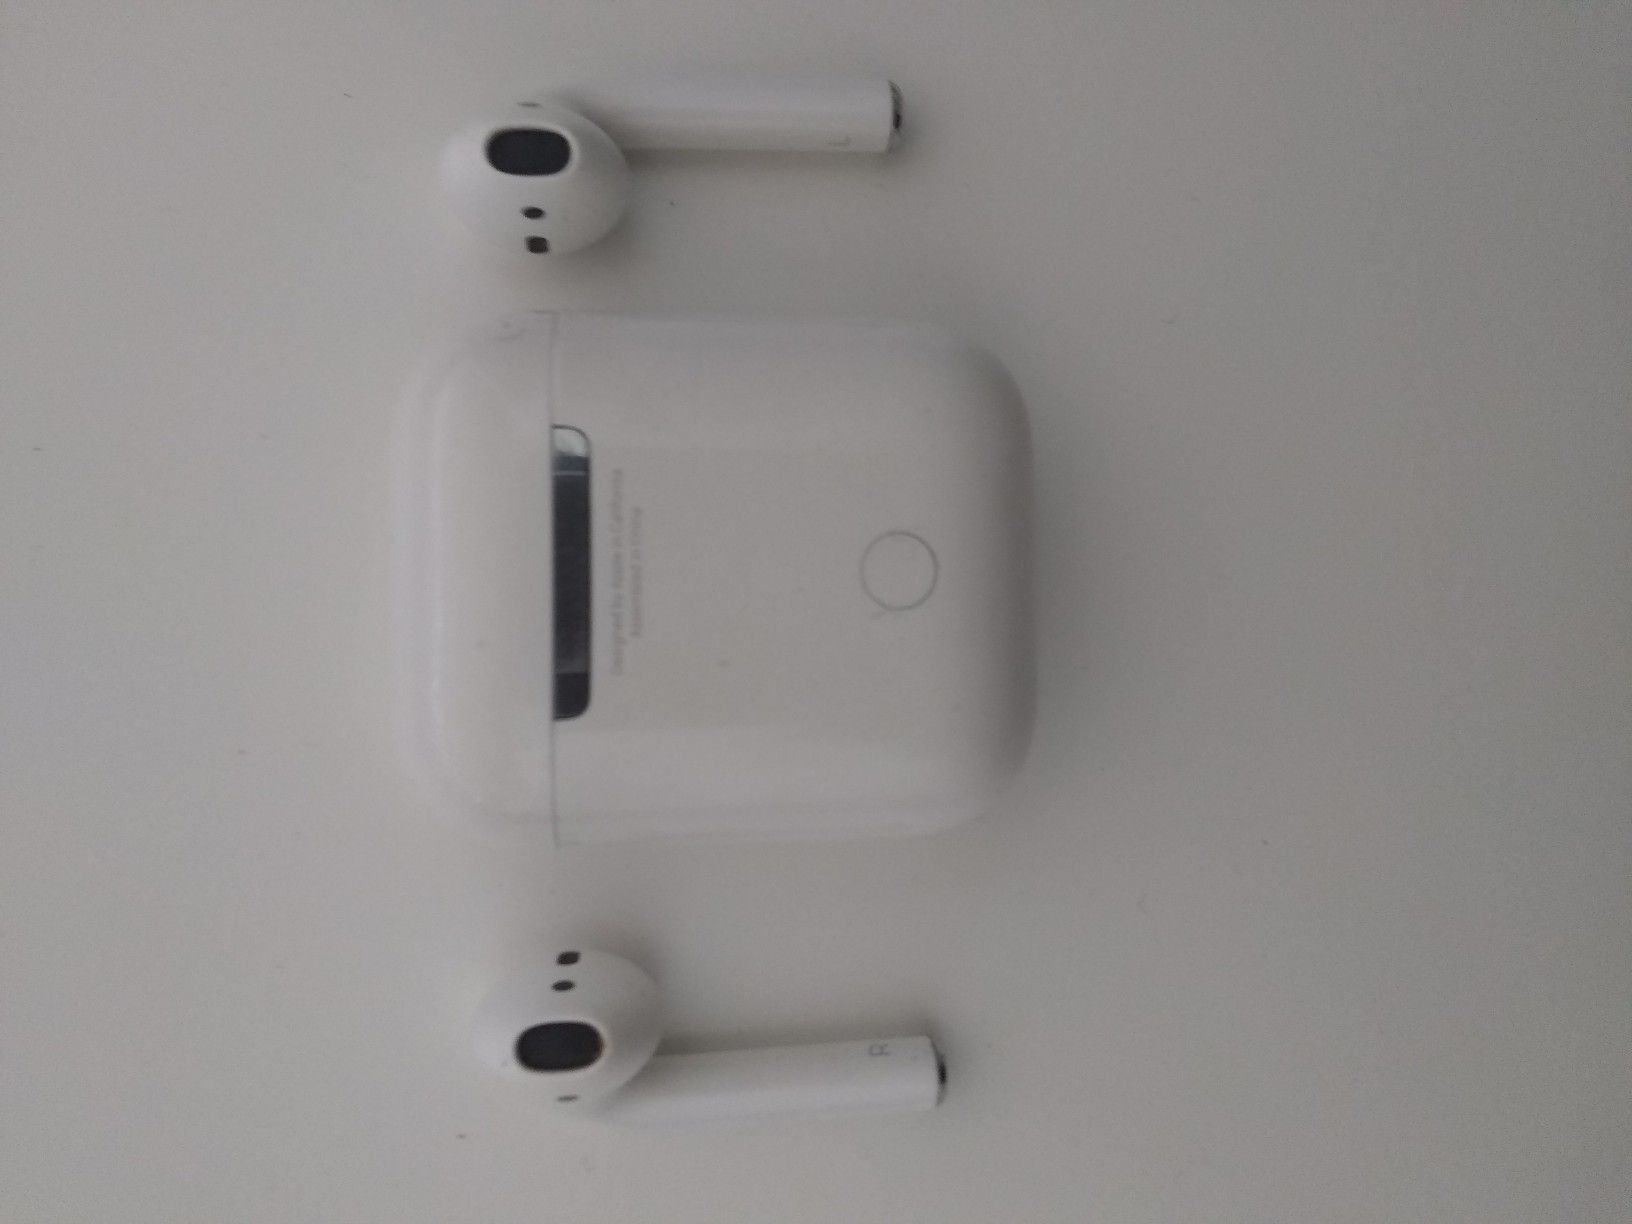 Airpods for iPhone